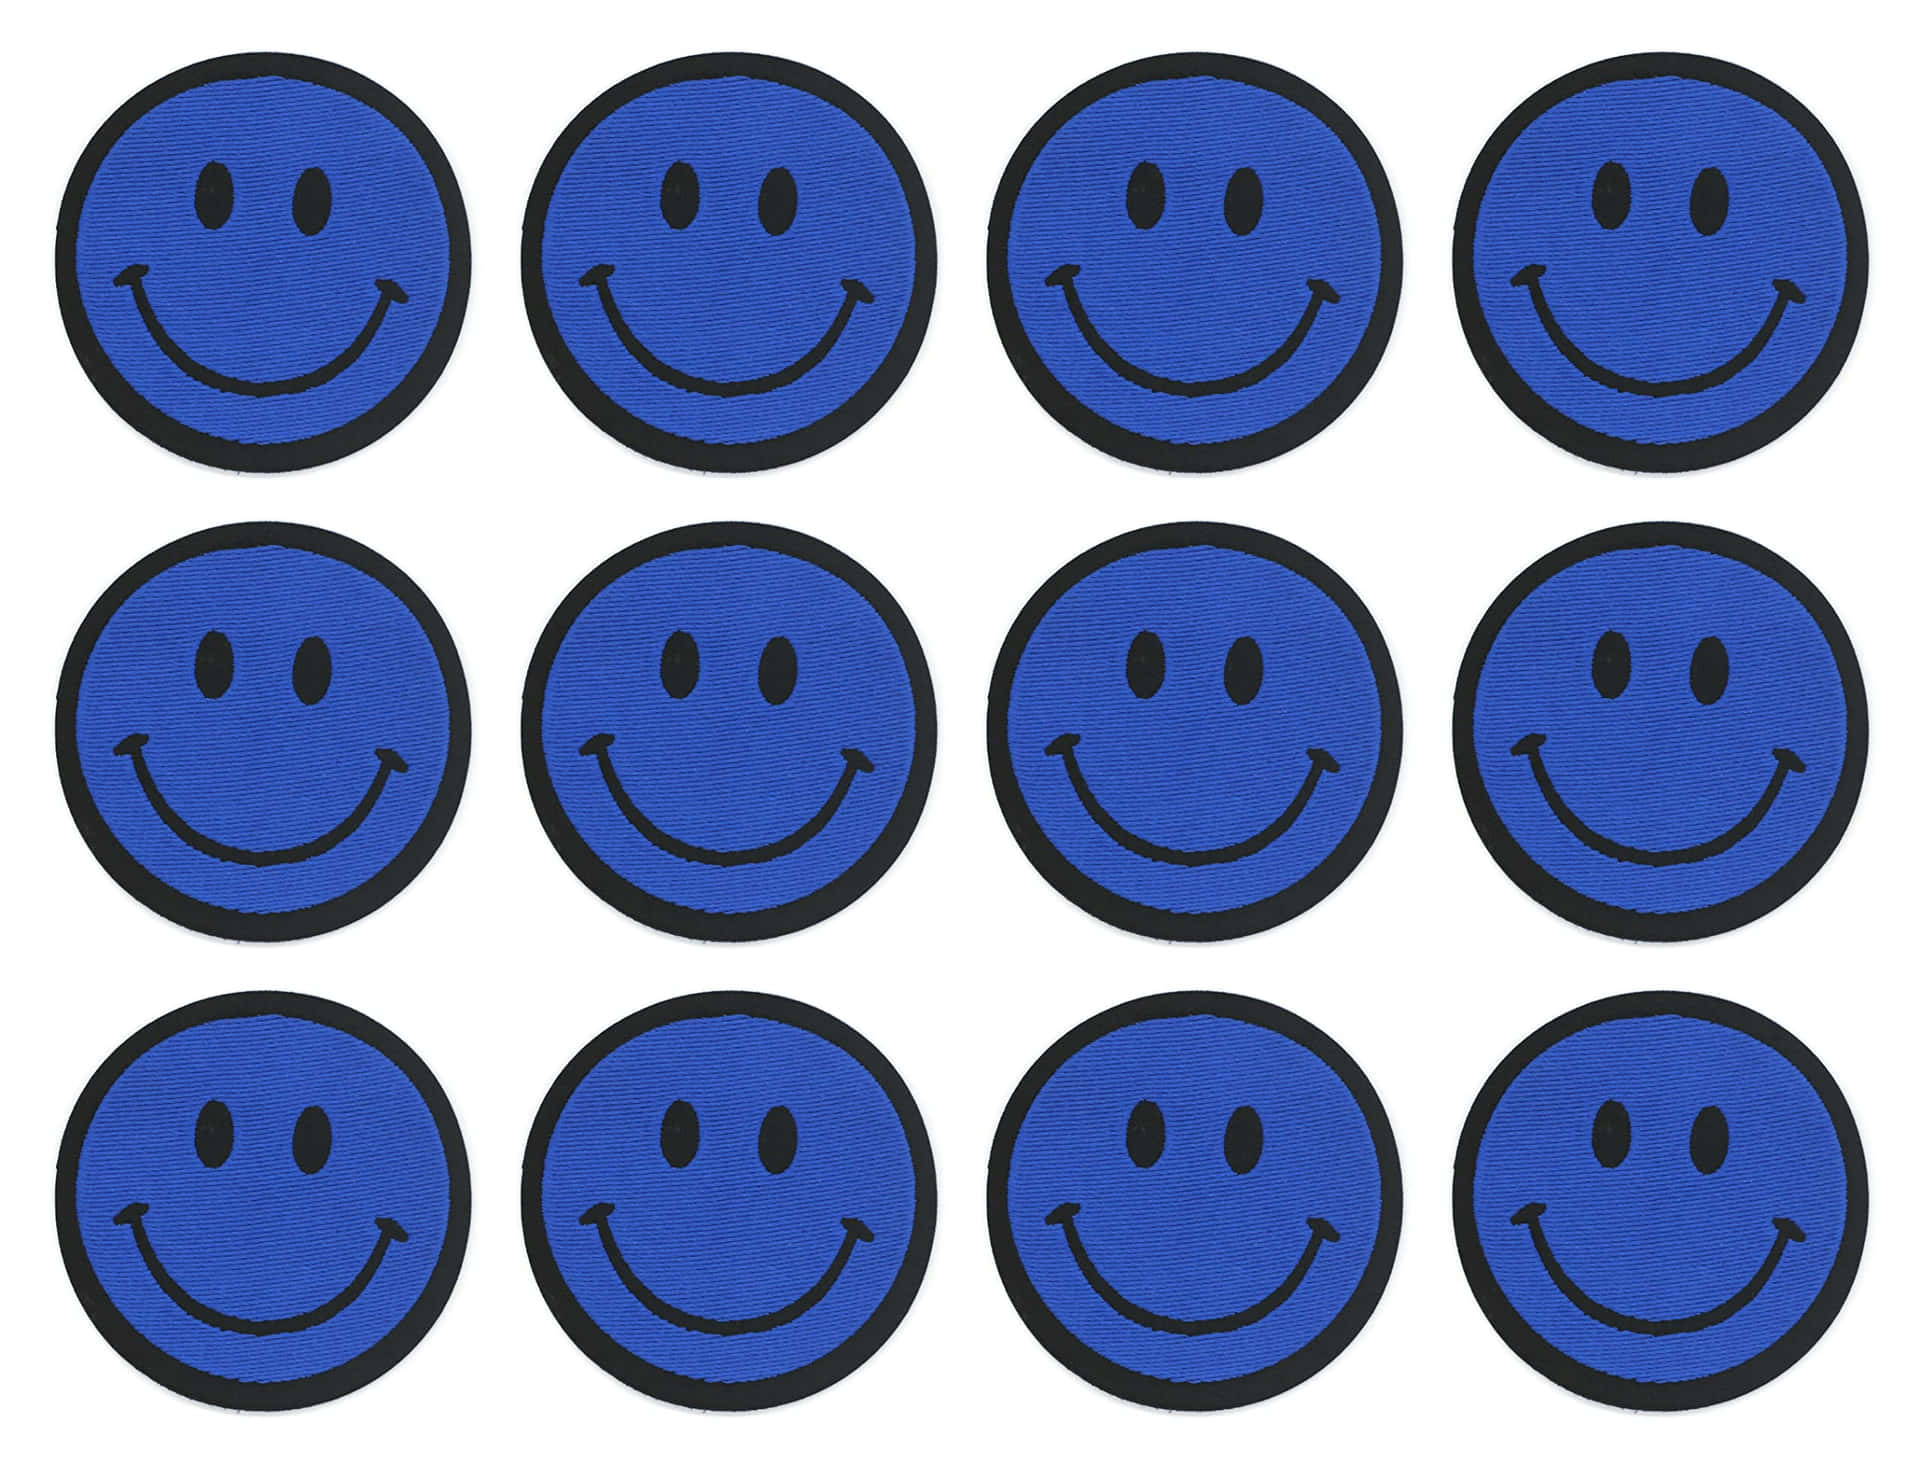 Blue Smiley Face Patches Array Wallpaper